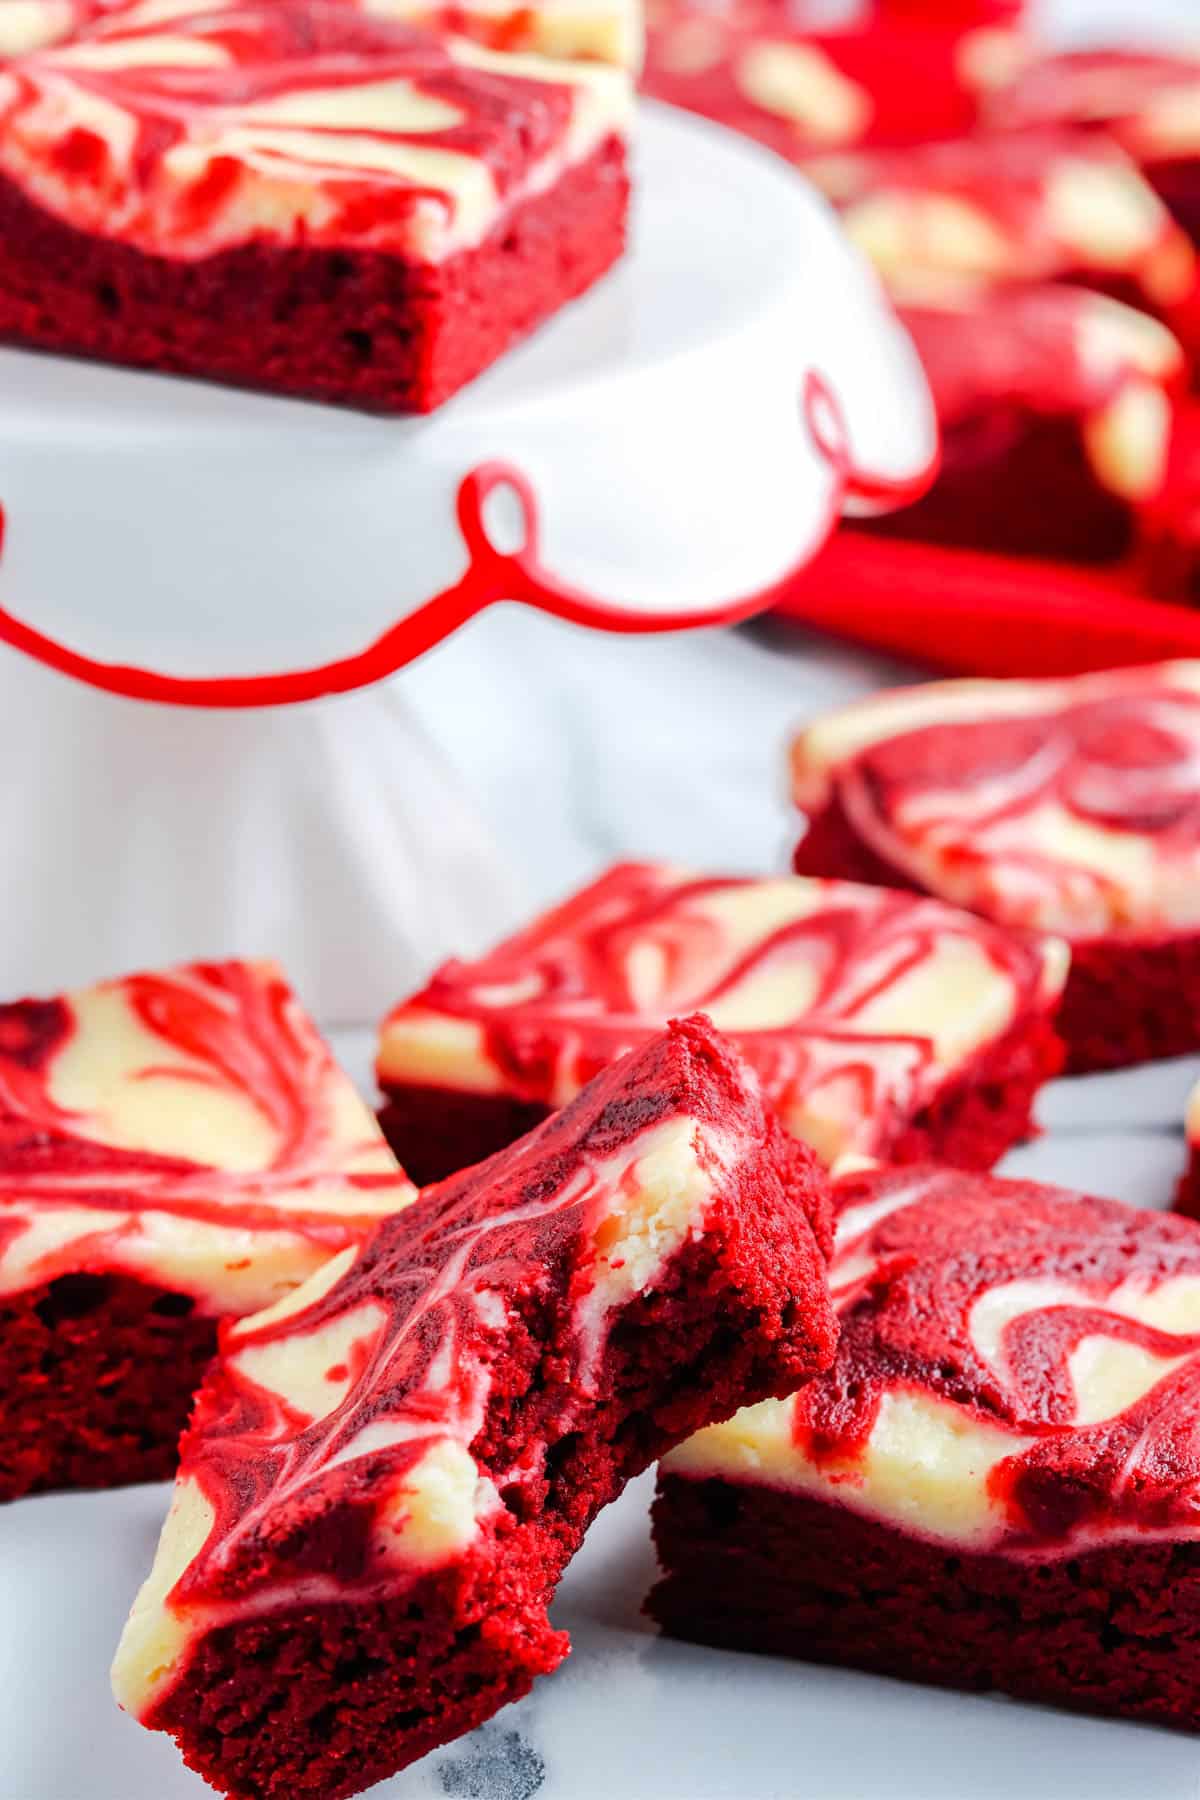 A close up picture of a Red Velvet Brownie with a bite taken out of it.